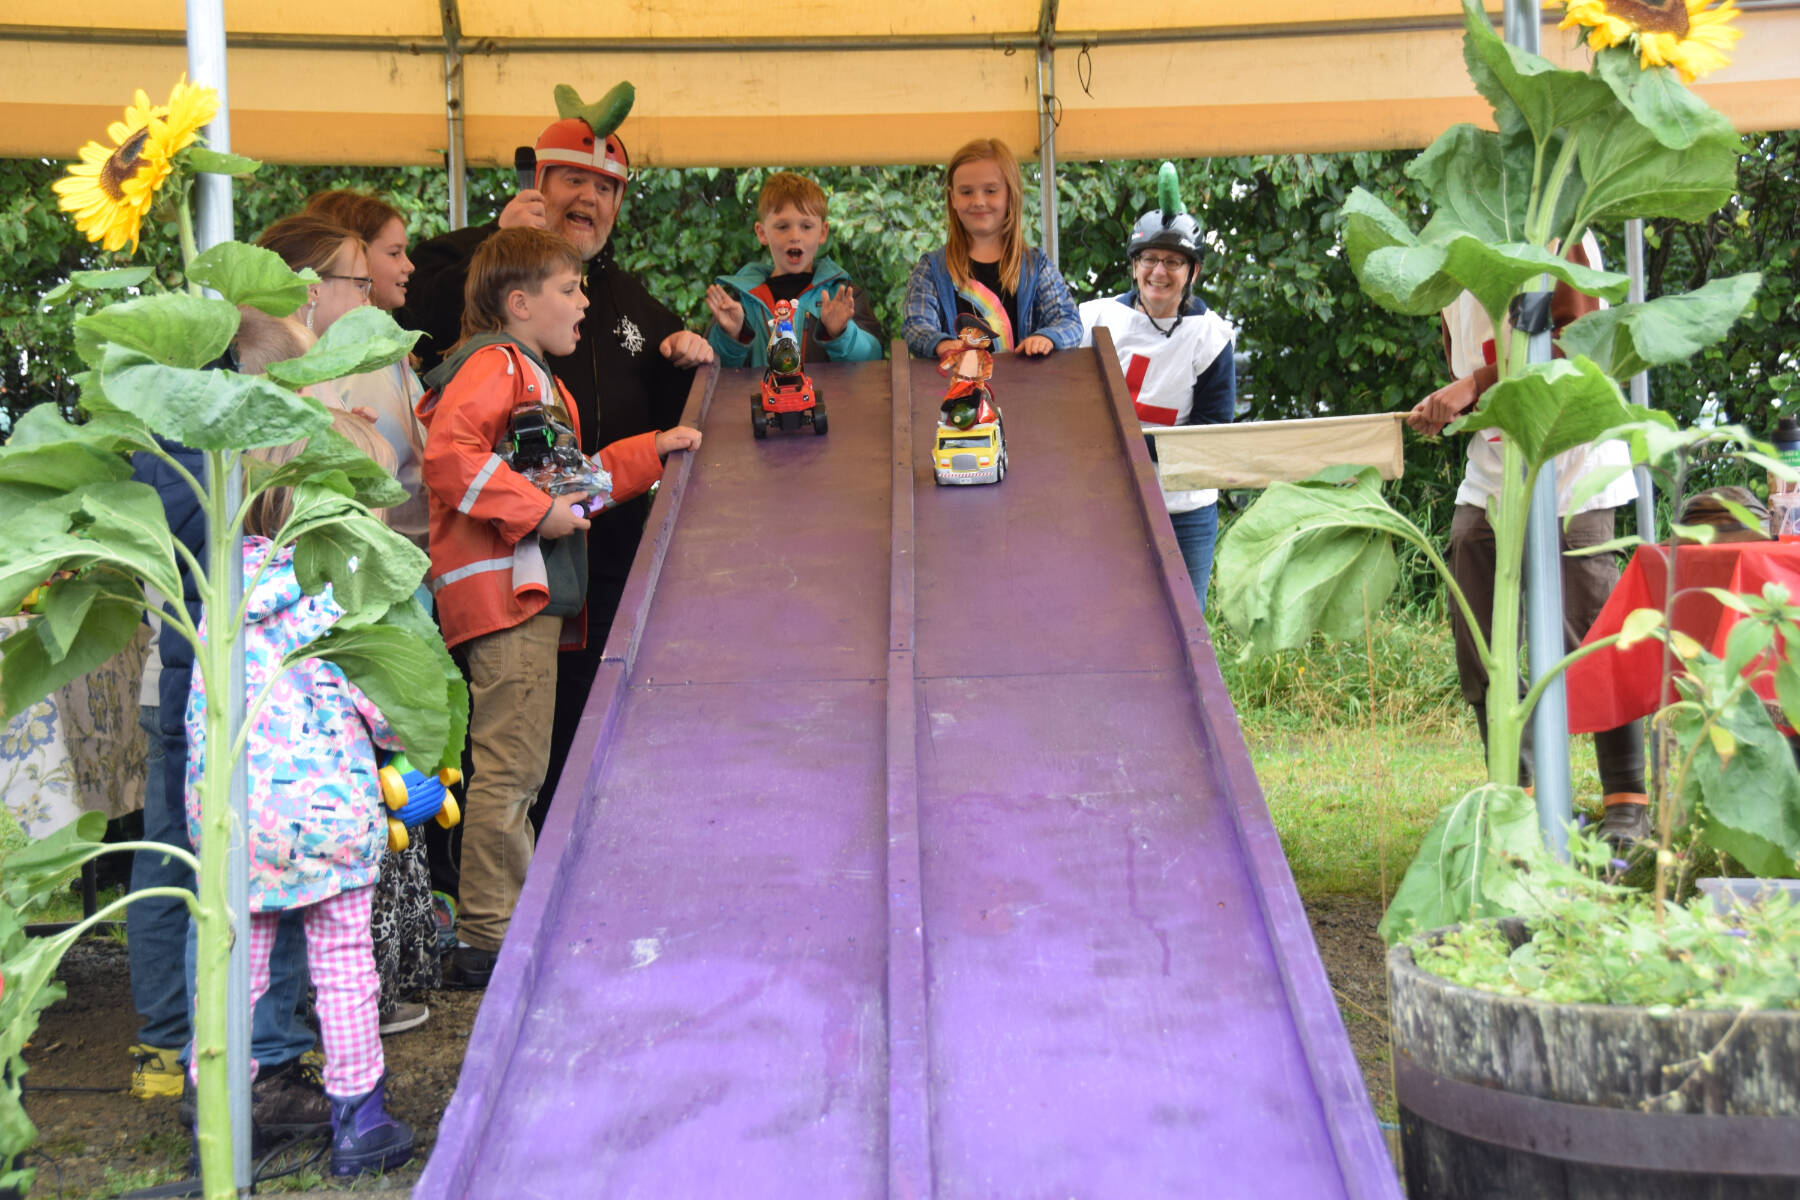 Kids race their crafted zucchini cars at the Homer Farmers Market Zucchini Festival on Saturday, Aug. 26, 2023 in Homer, Alaska. (Delcenia Cosman/Homer News)